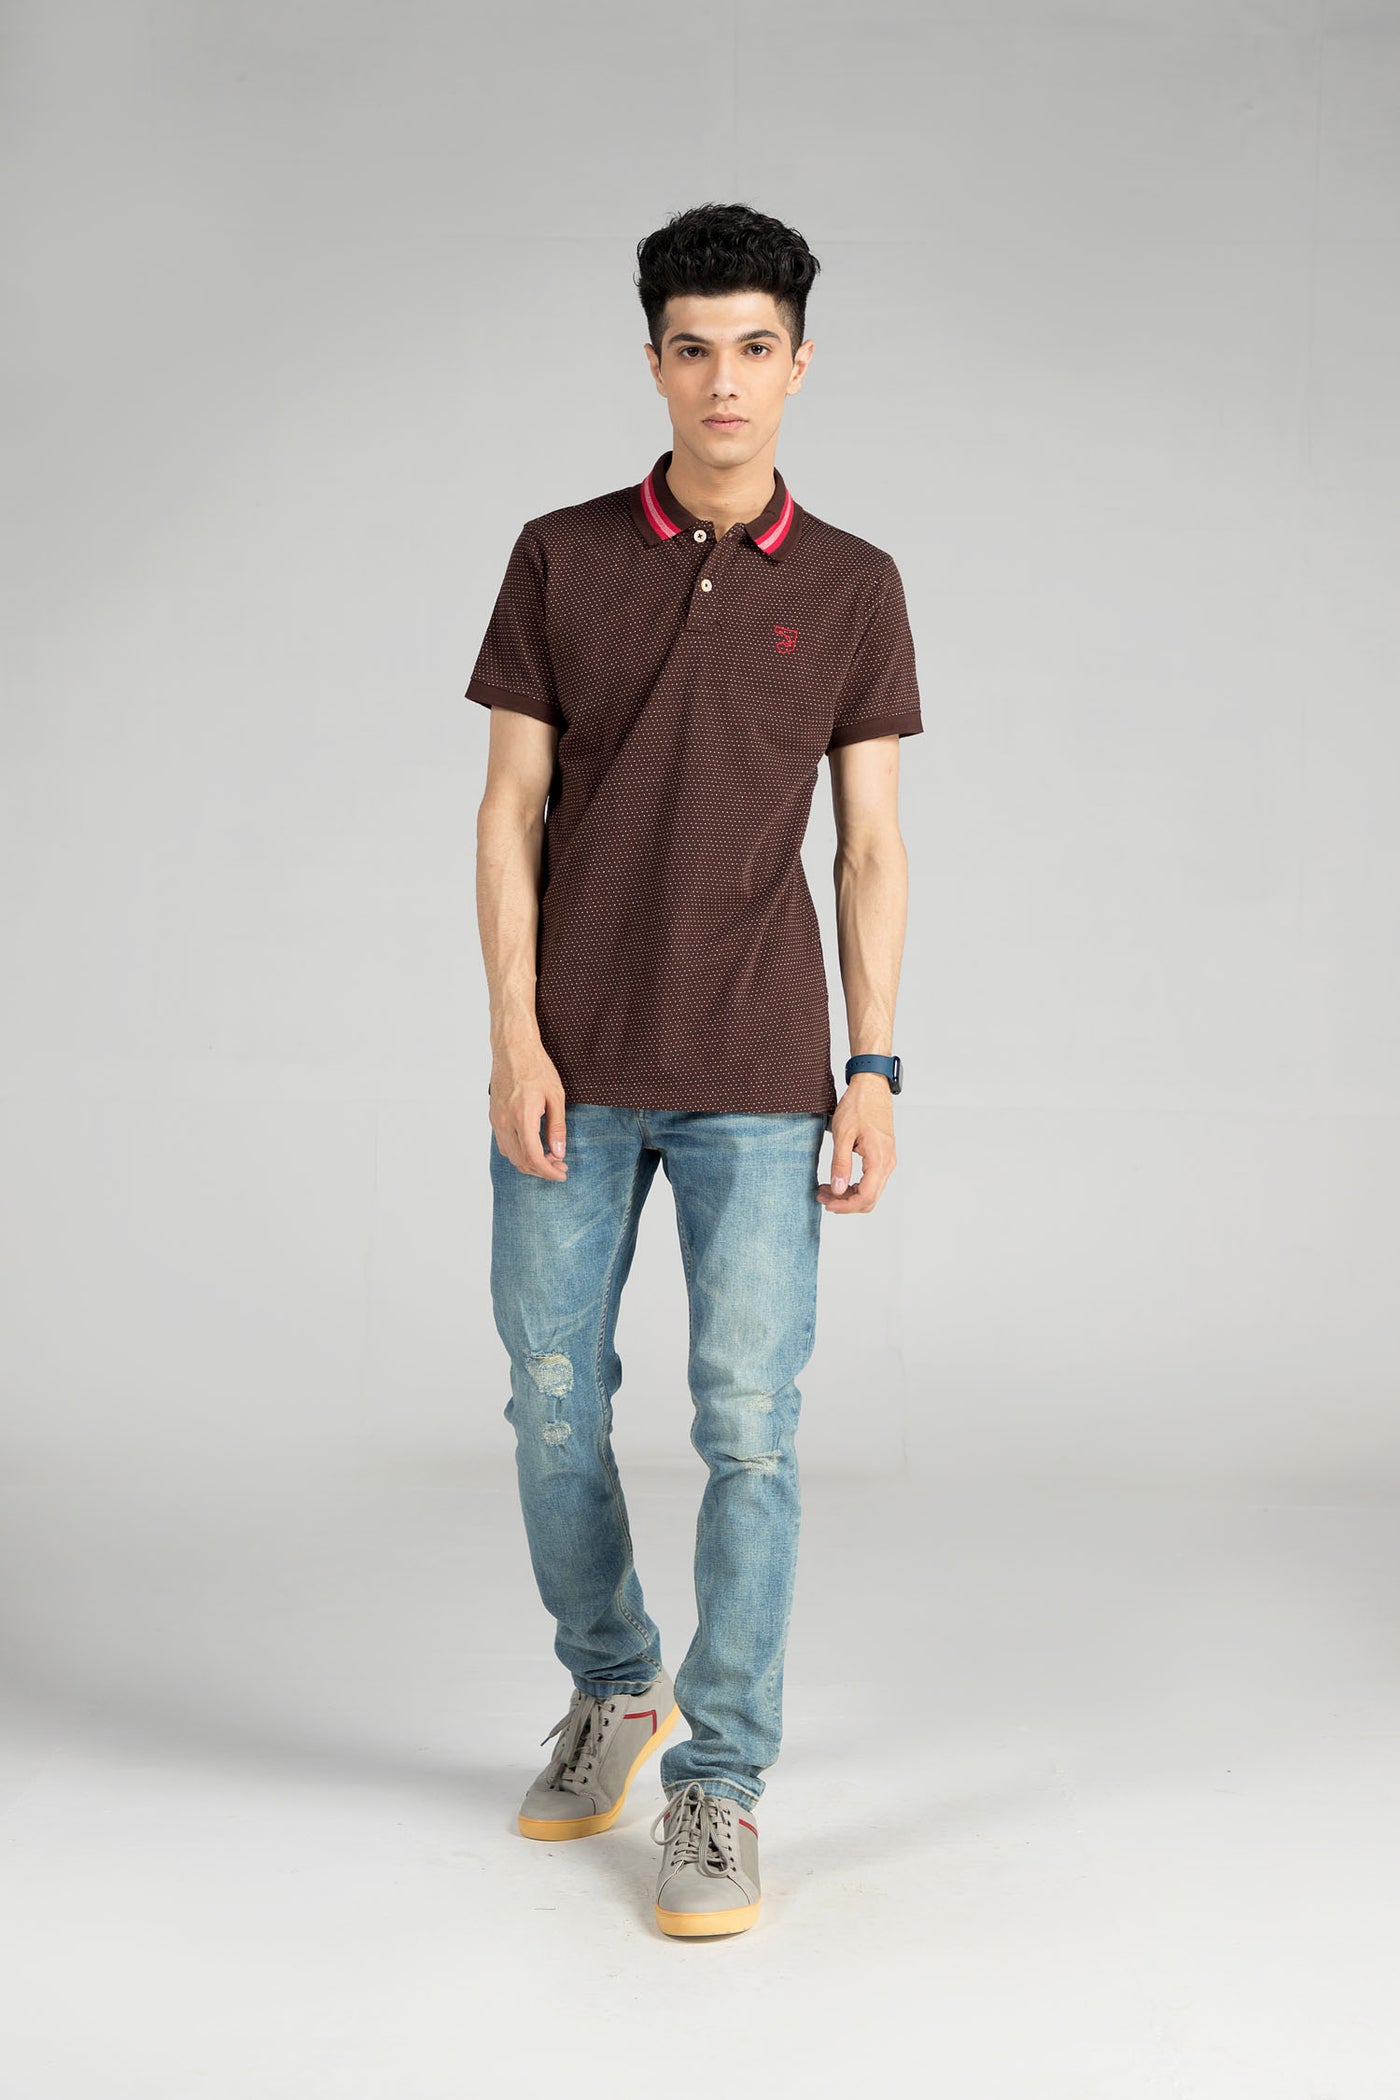 Dotted Chocolate Polo